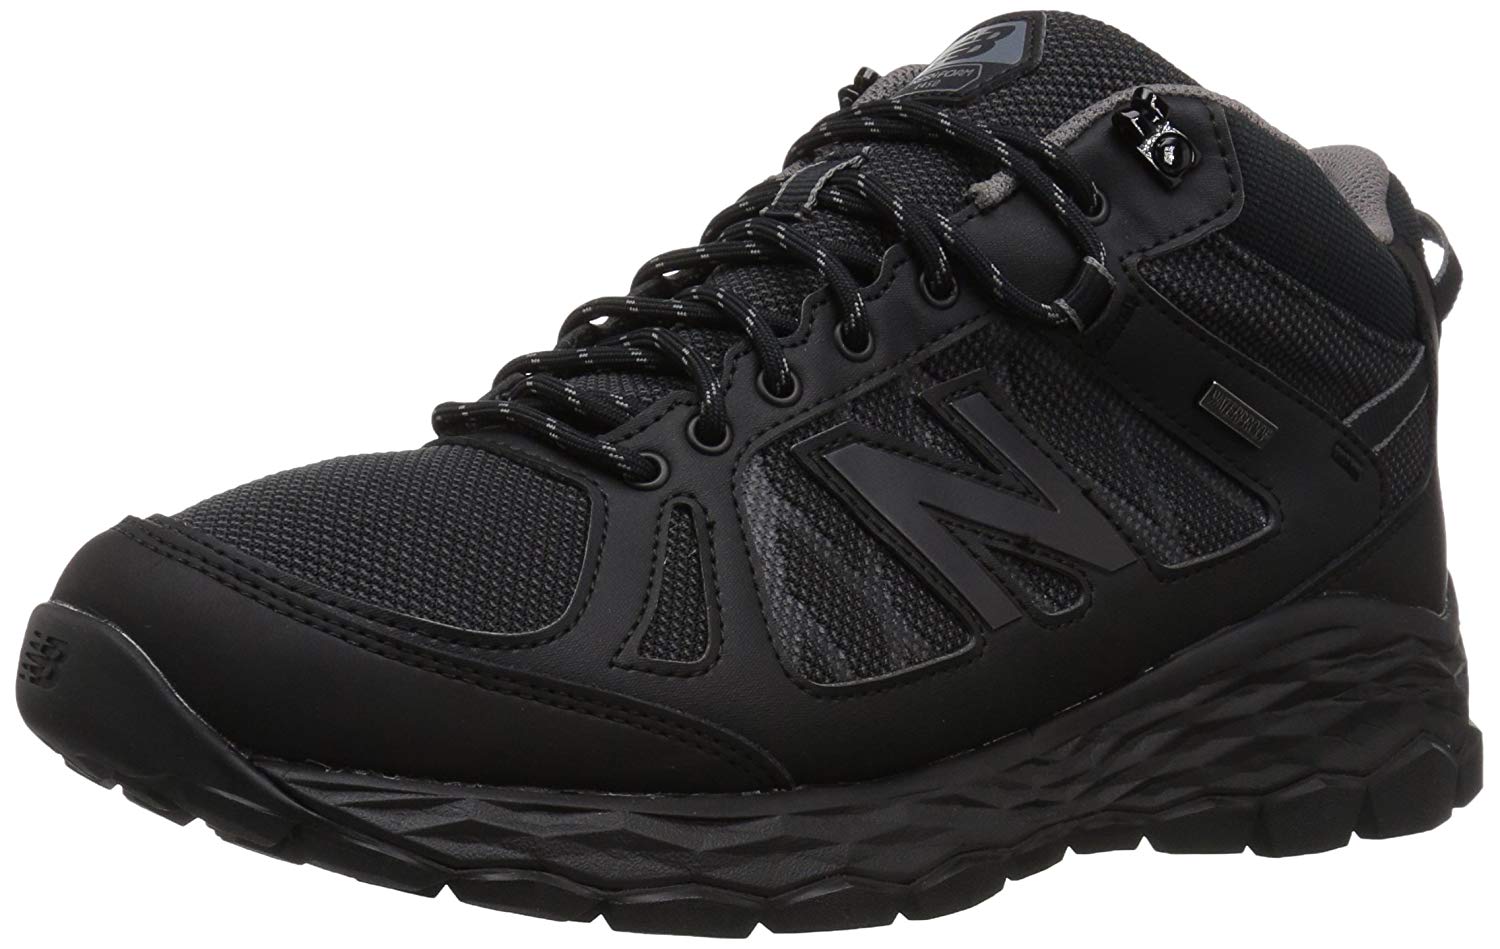 New Balance Mens 1450 Low Top Lace Up Walking Shoes | eBay